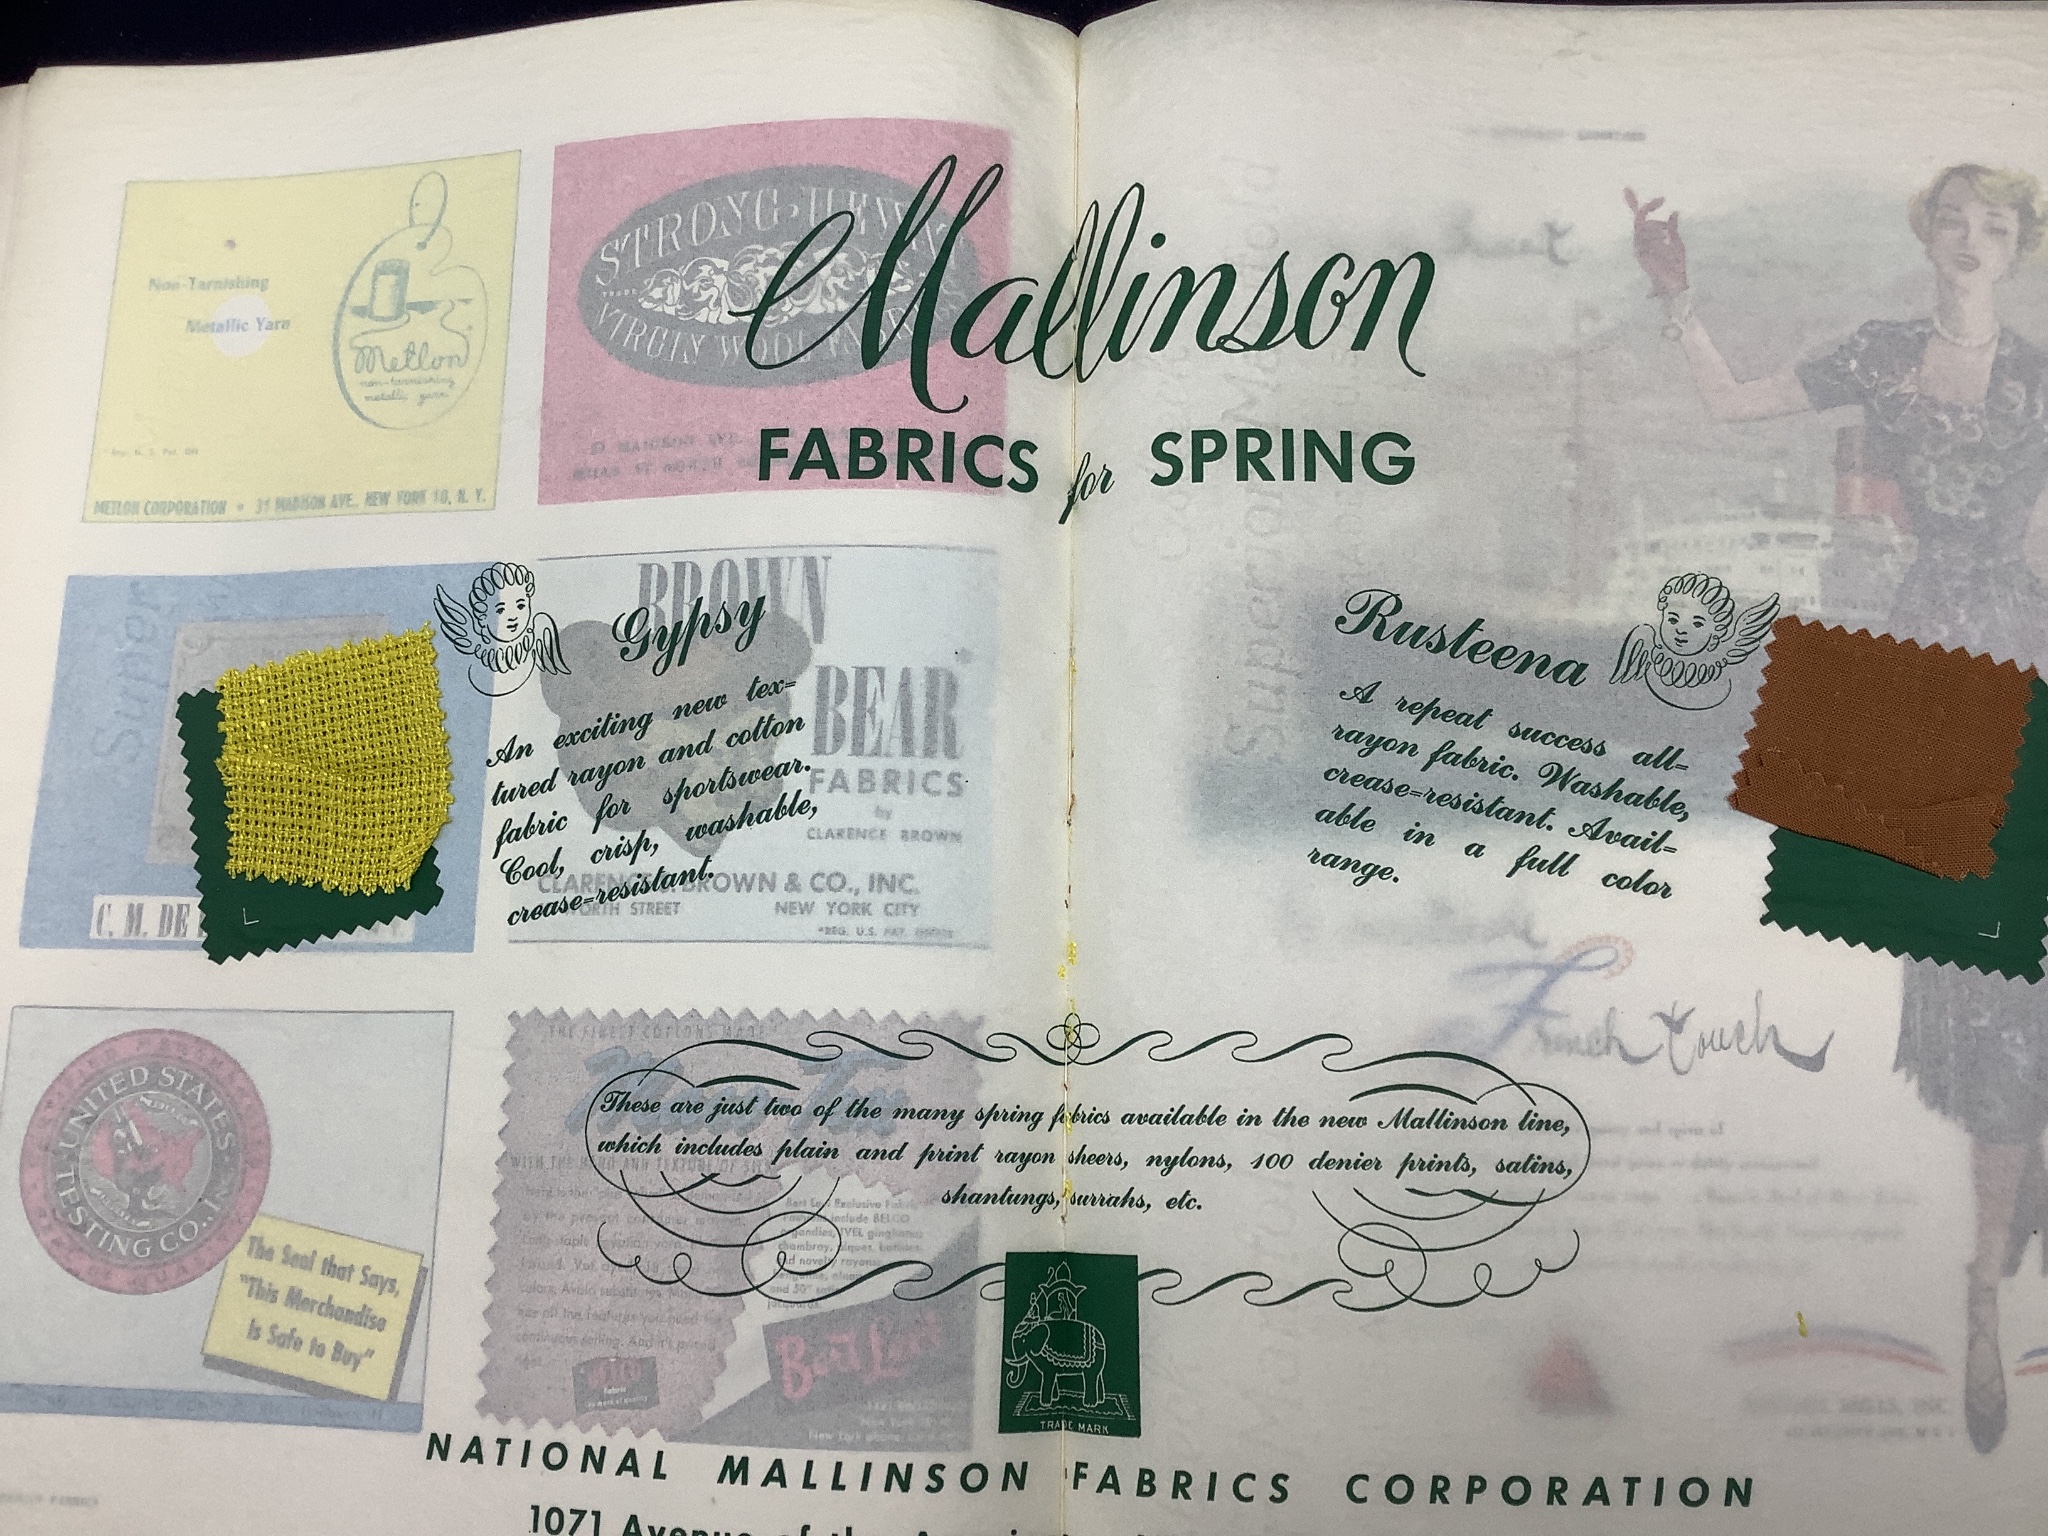 American Fabrics, 37 magazines from 1948-1961, all containing swatches of fabric